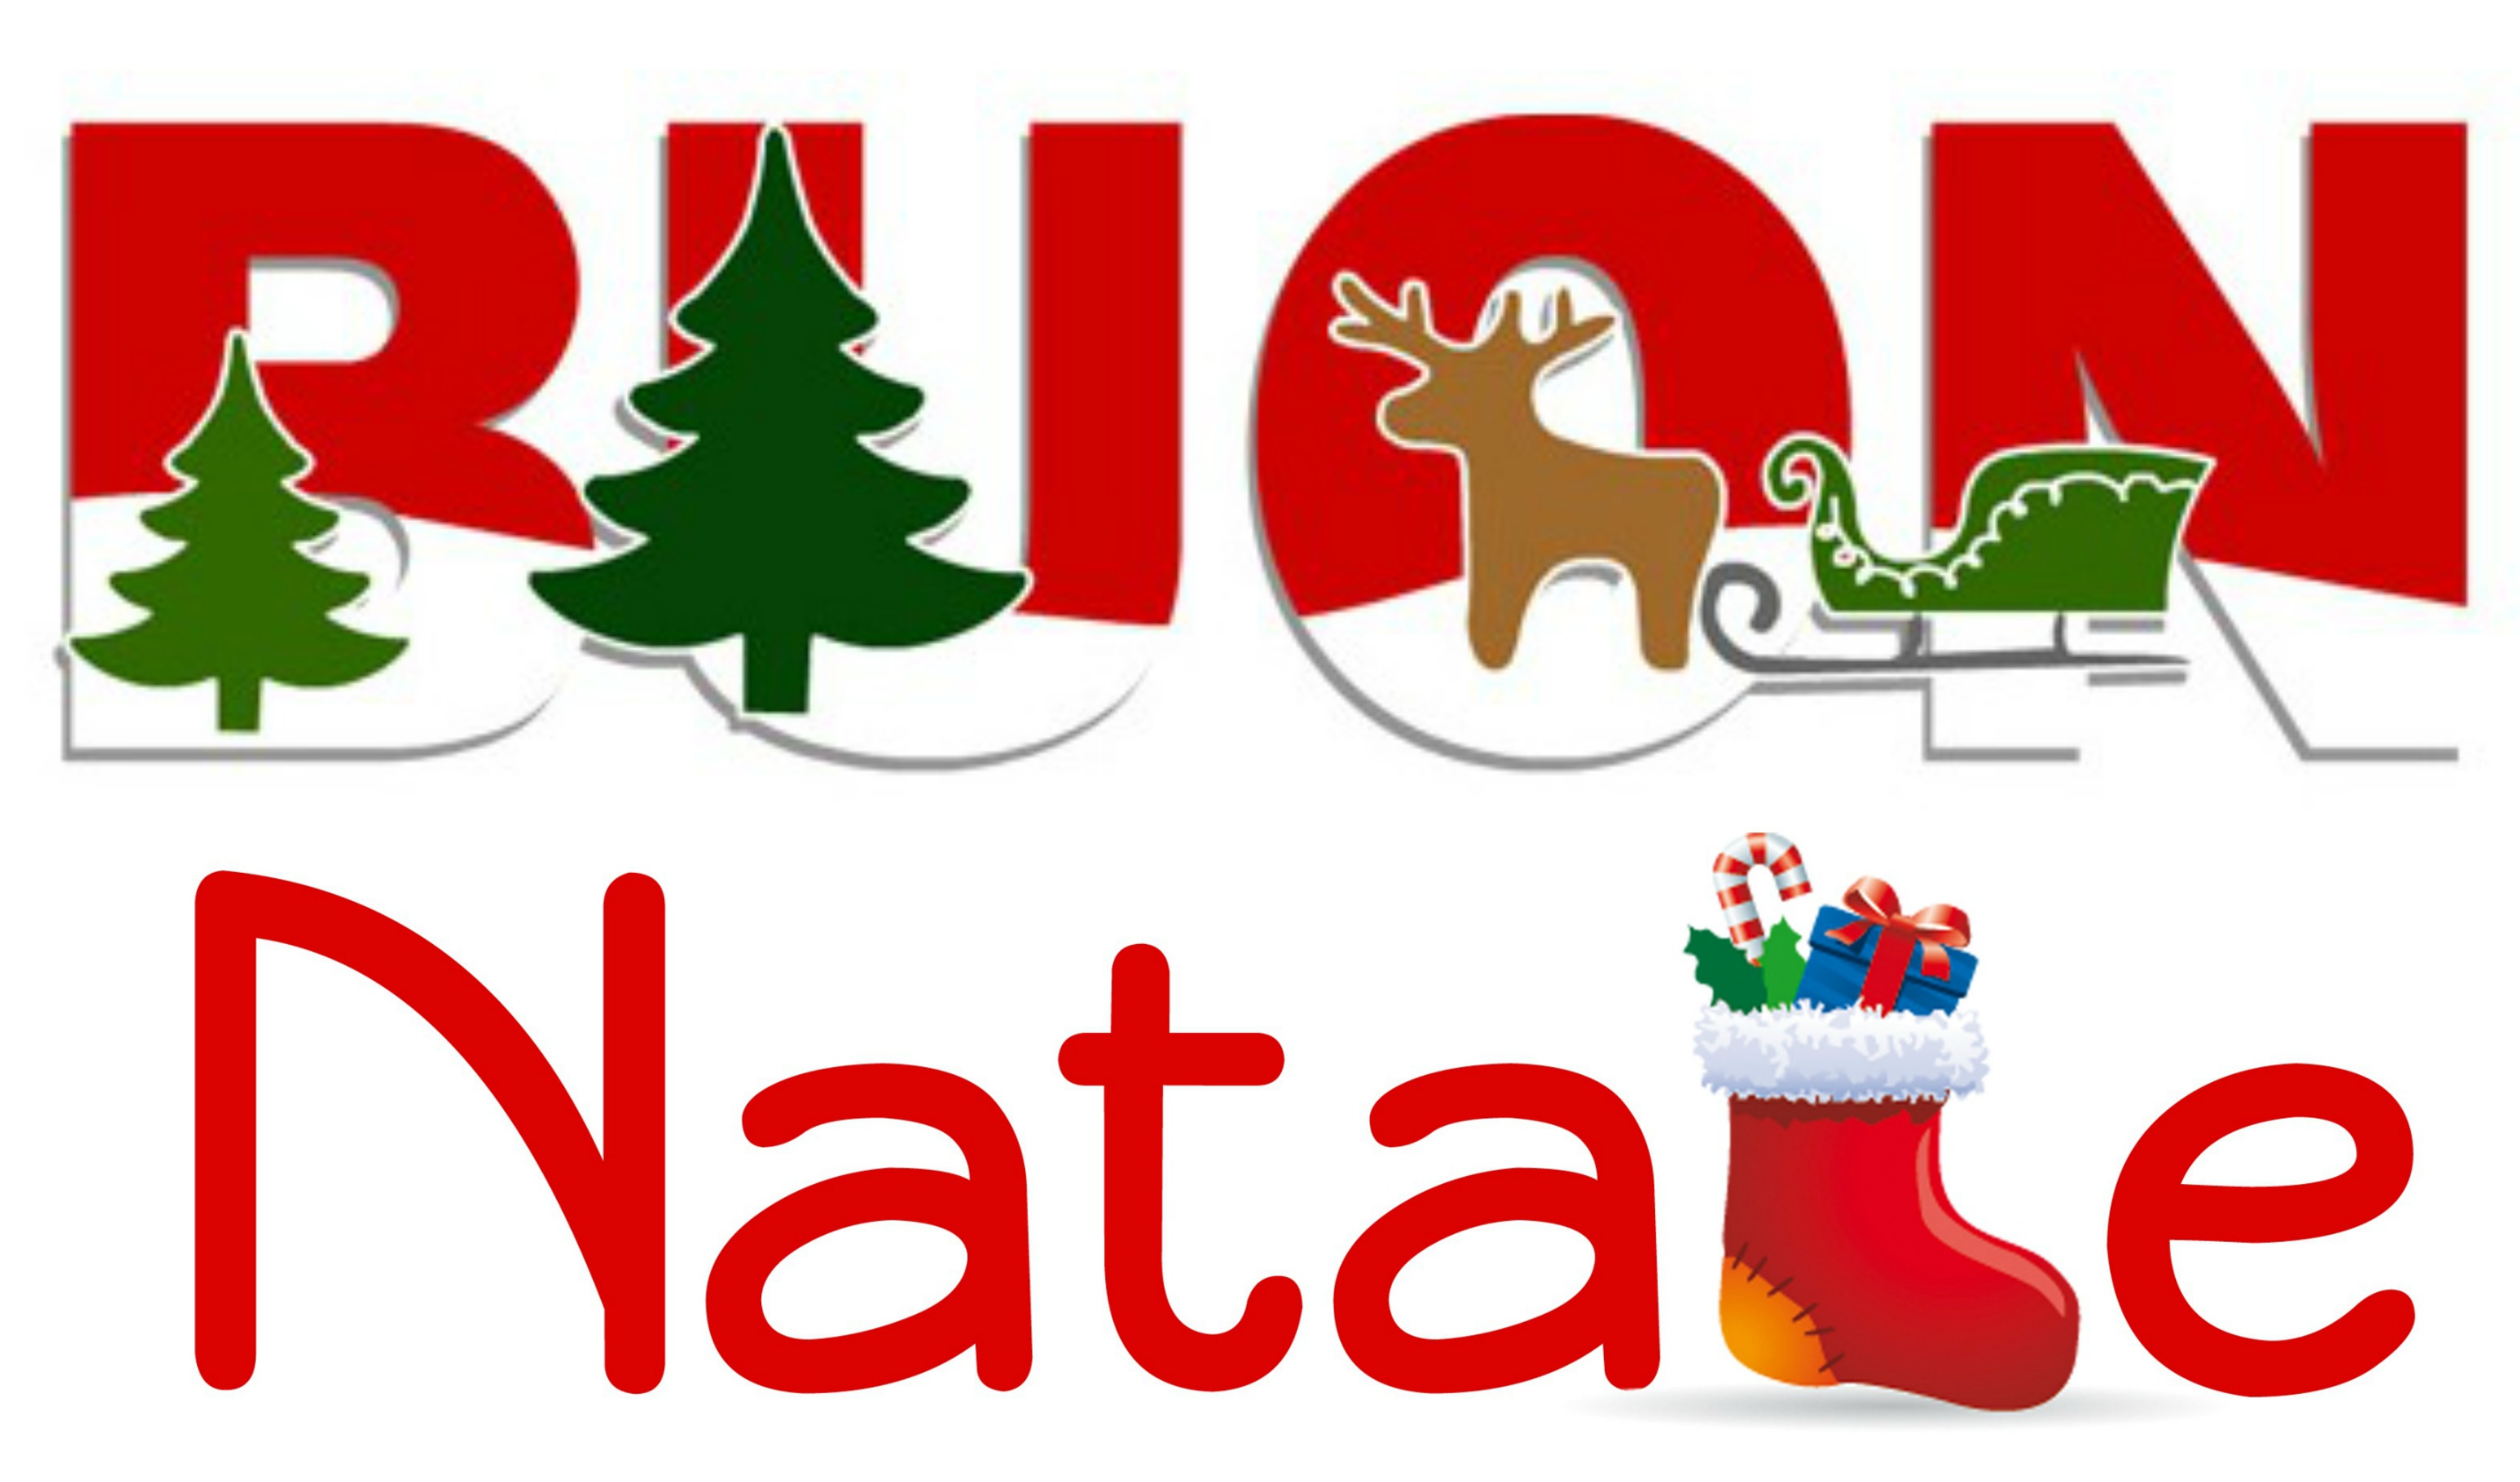 Buon Natale Pictures.Buon Natale Smile Laugh Travel Love Be Yourself Enjoy Life